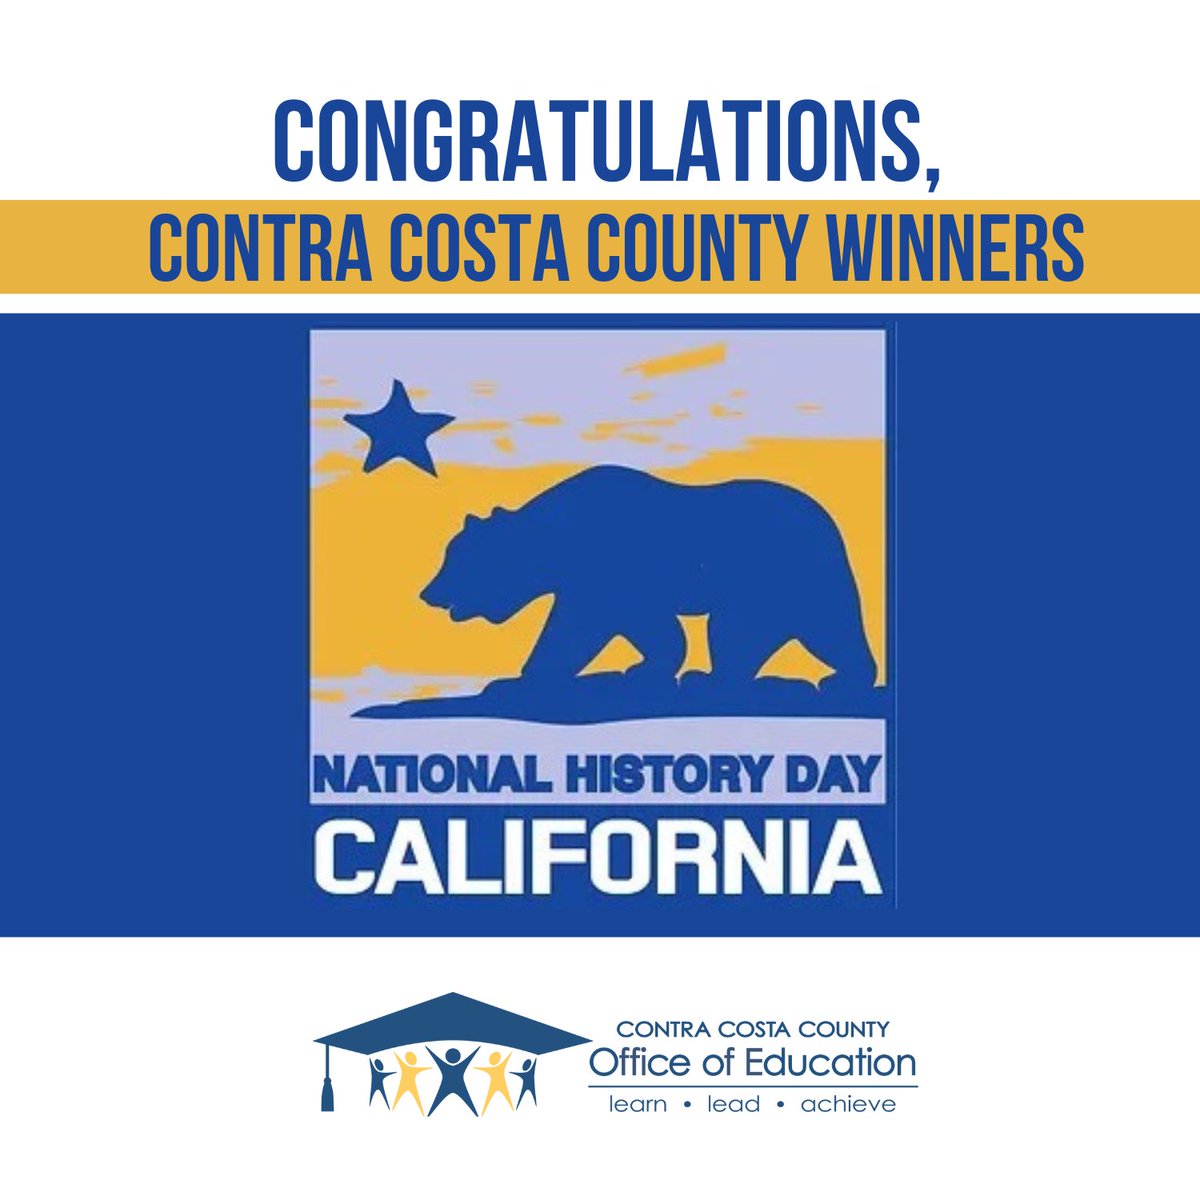 NDH Awards 🏆Four Contra Costa County students received awards at the California National Day of History competition. 🌟 Three Dougherty Valley High School students clinched Champion awards. 🏅An Athenian School student received The Stephenson Family Award for Sports History.